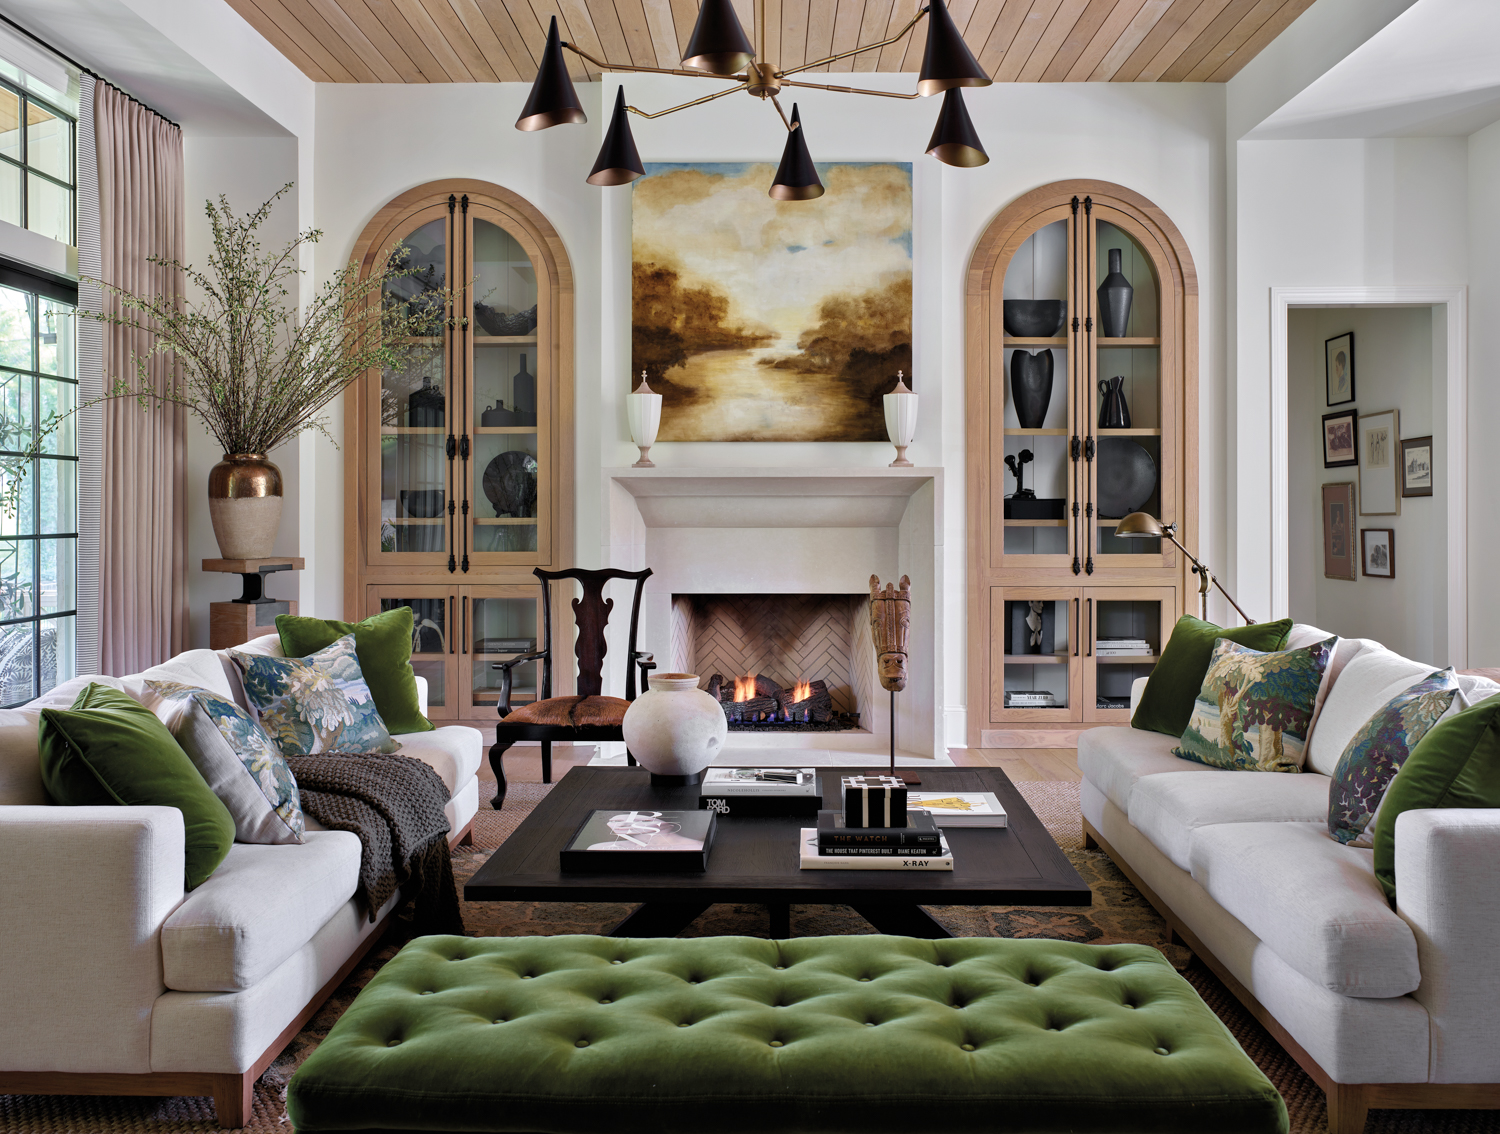 Living room with a pair of arched cabinets and sofas, a tufted green ottoman and a sepia-toned landscape painting